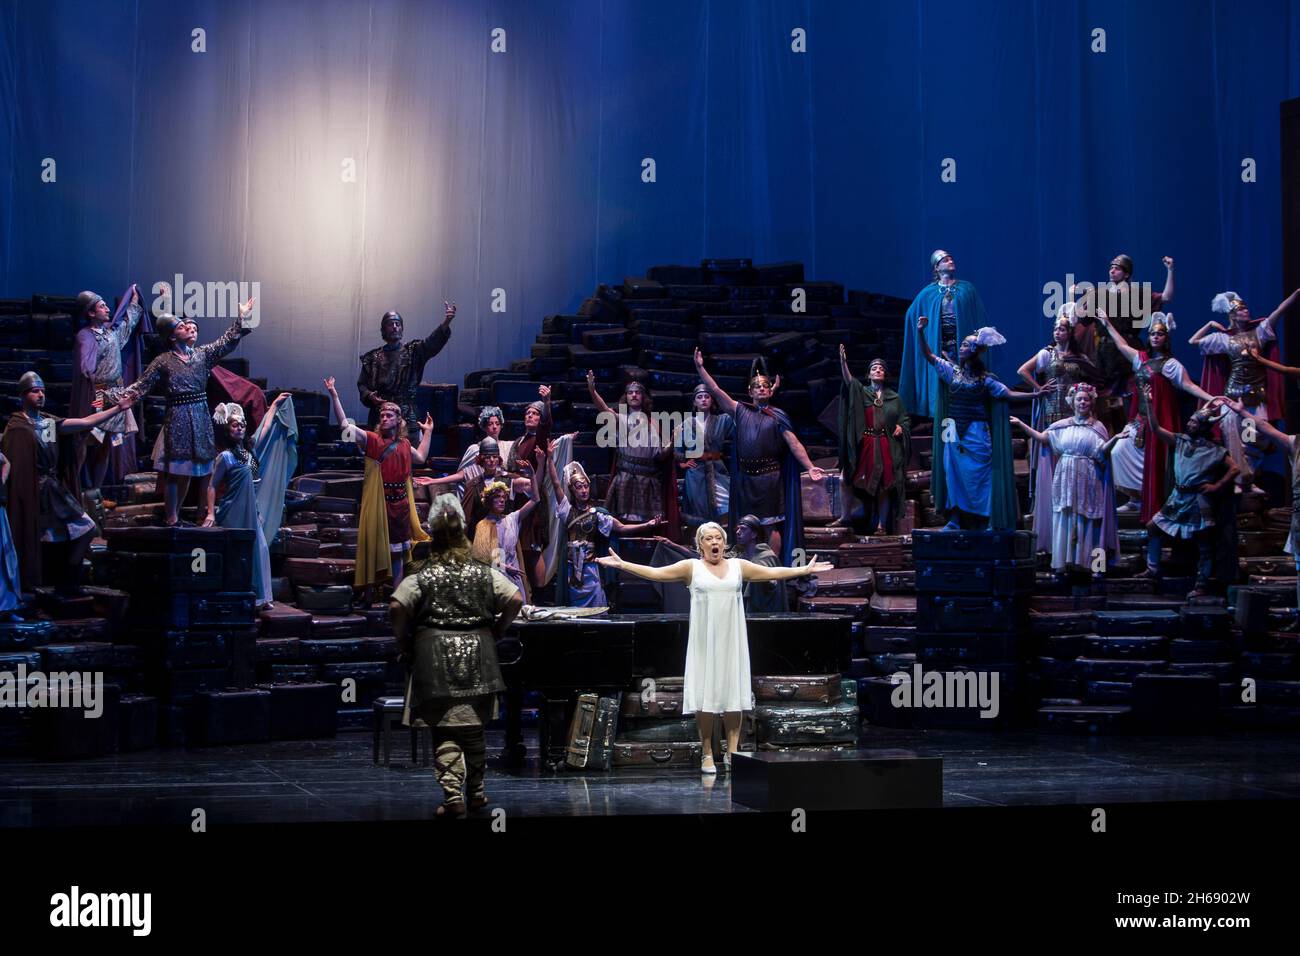 Berlin, Germany. 14th Oct, 2021. Nina Stemme as Brünnhilde and Clay Hille as Siegfried stand on stage at the Deutsche Oper Berlin during a rehearsal for the Wagner opera 'Götterdämmerung'. Credit: Nina Hansch/dpa/Alamy Live News Stock Photo